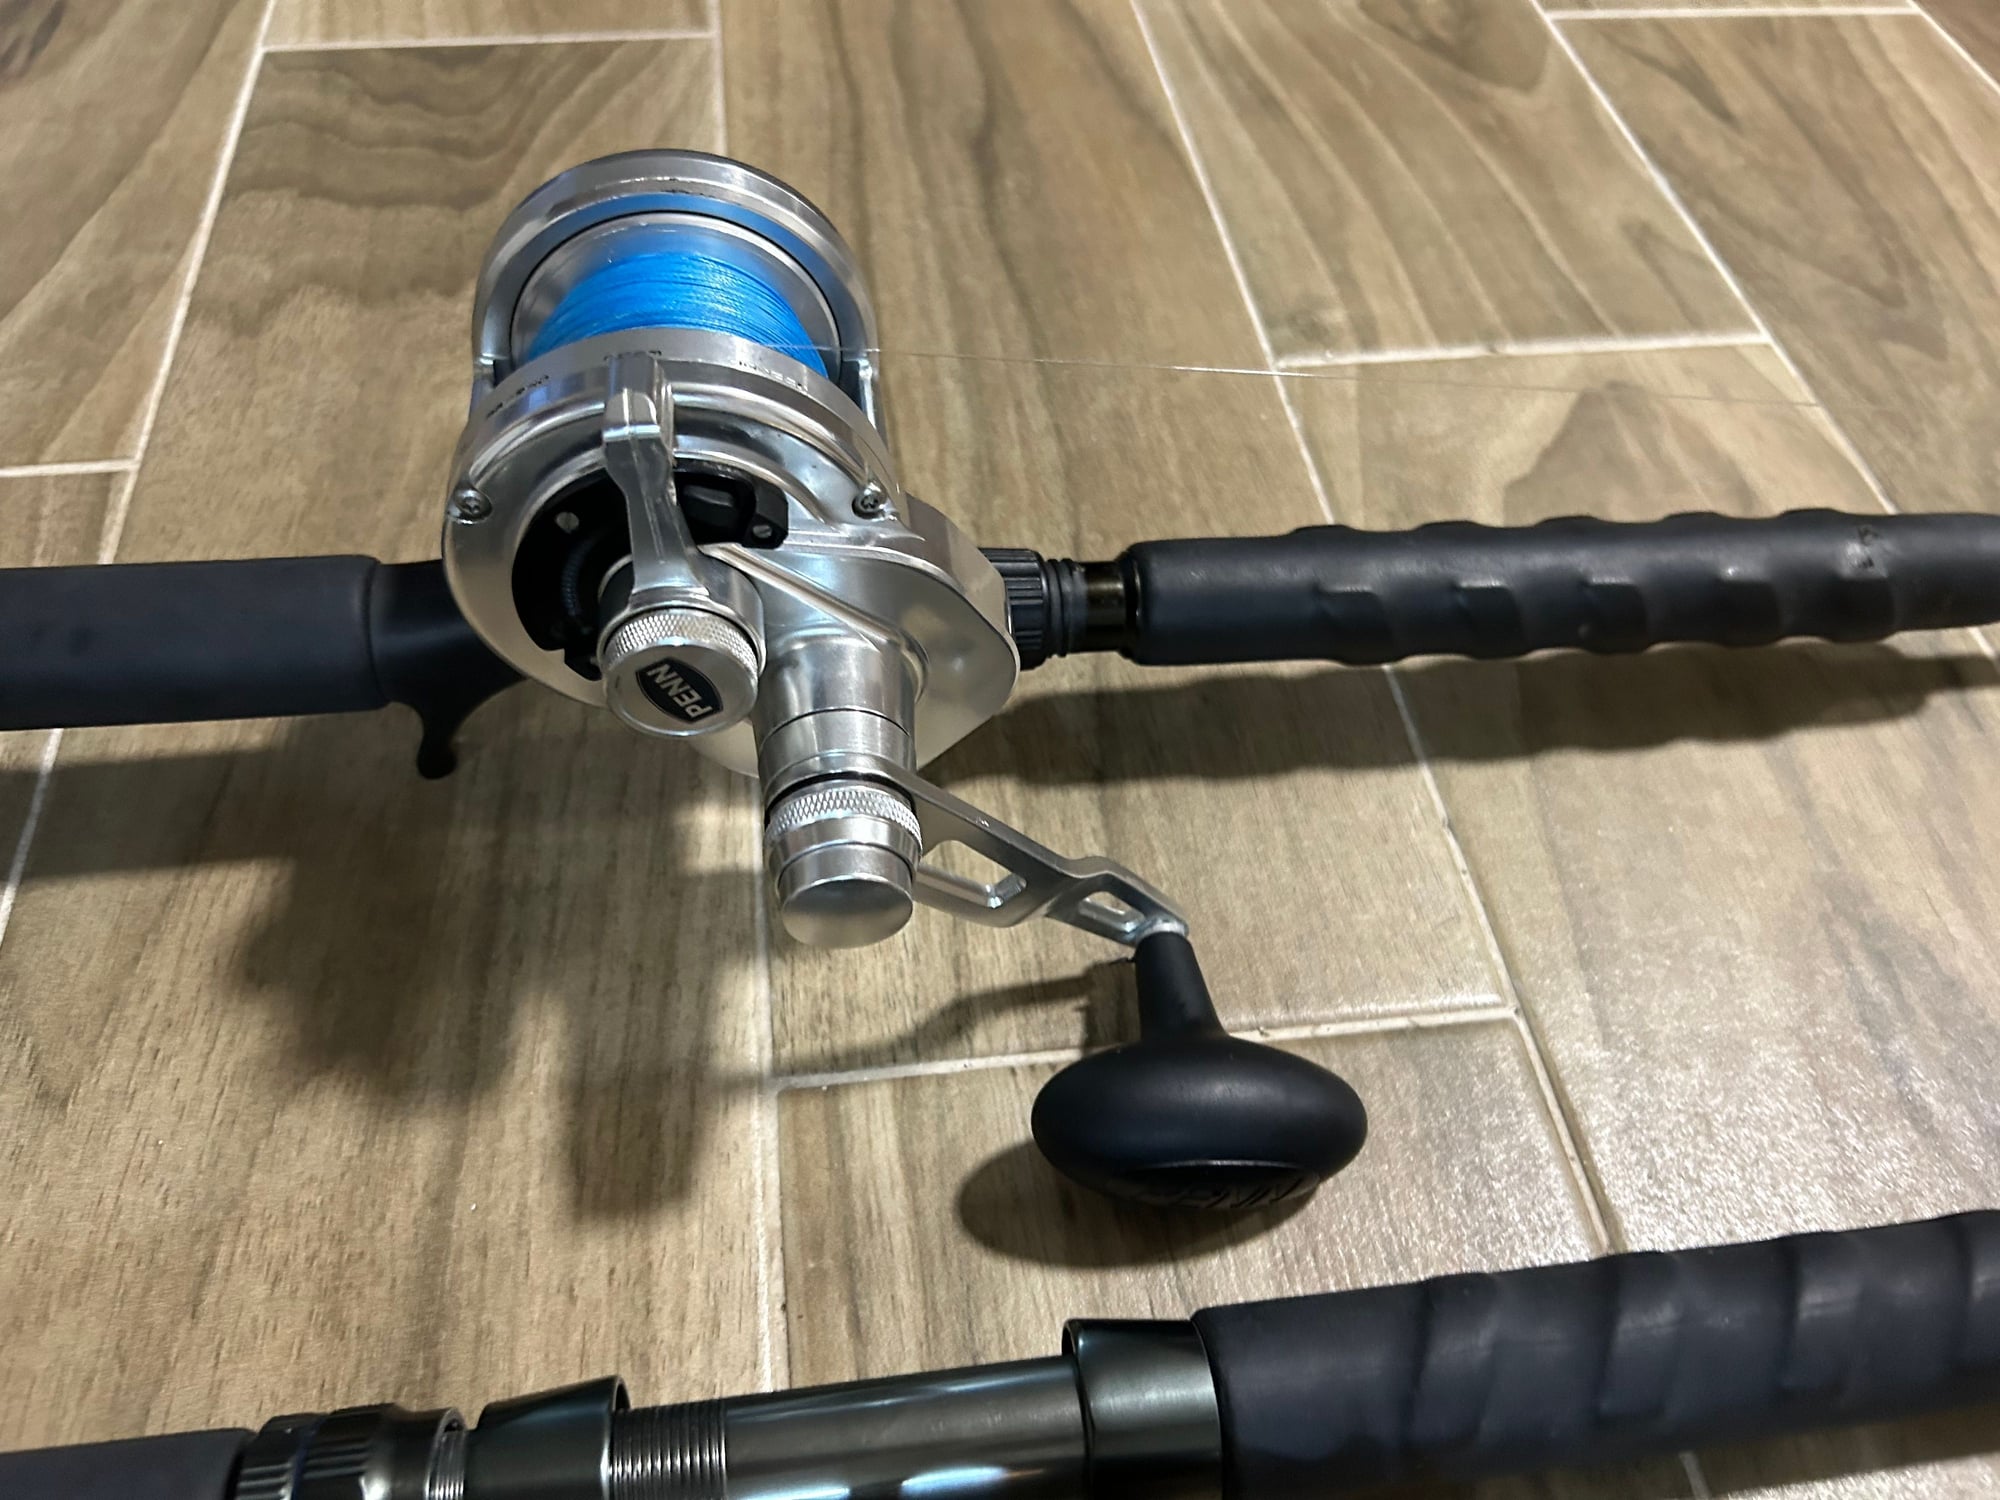 Penn Torque 25NLD2 And Shimano Spinfisher 12000D Combos - The Hull Truth -  Boating and Fishing Forum